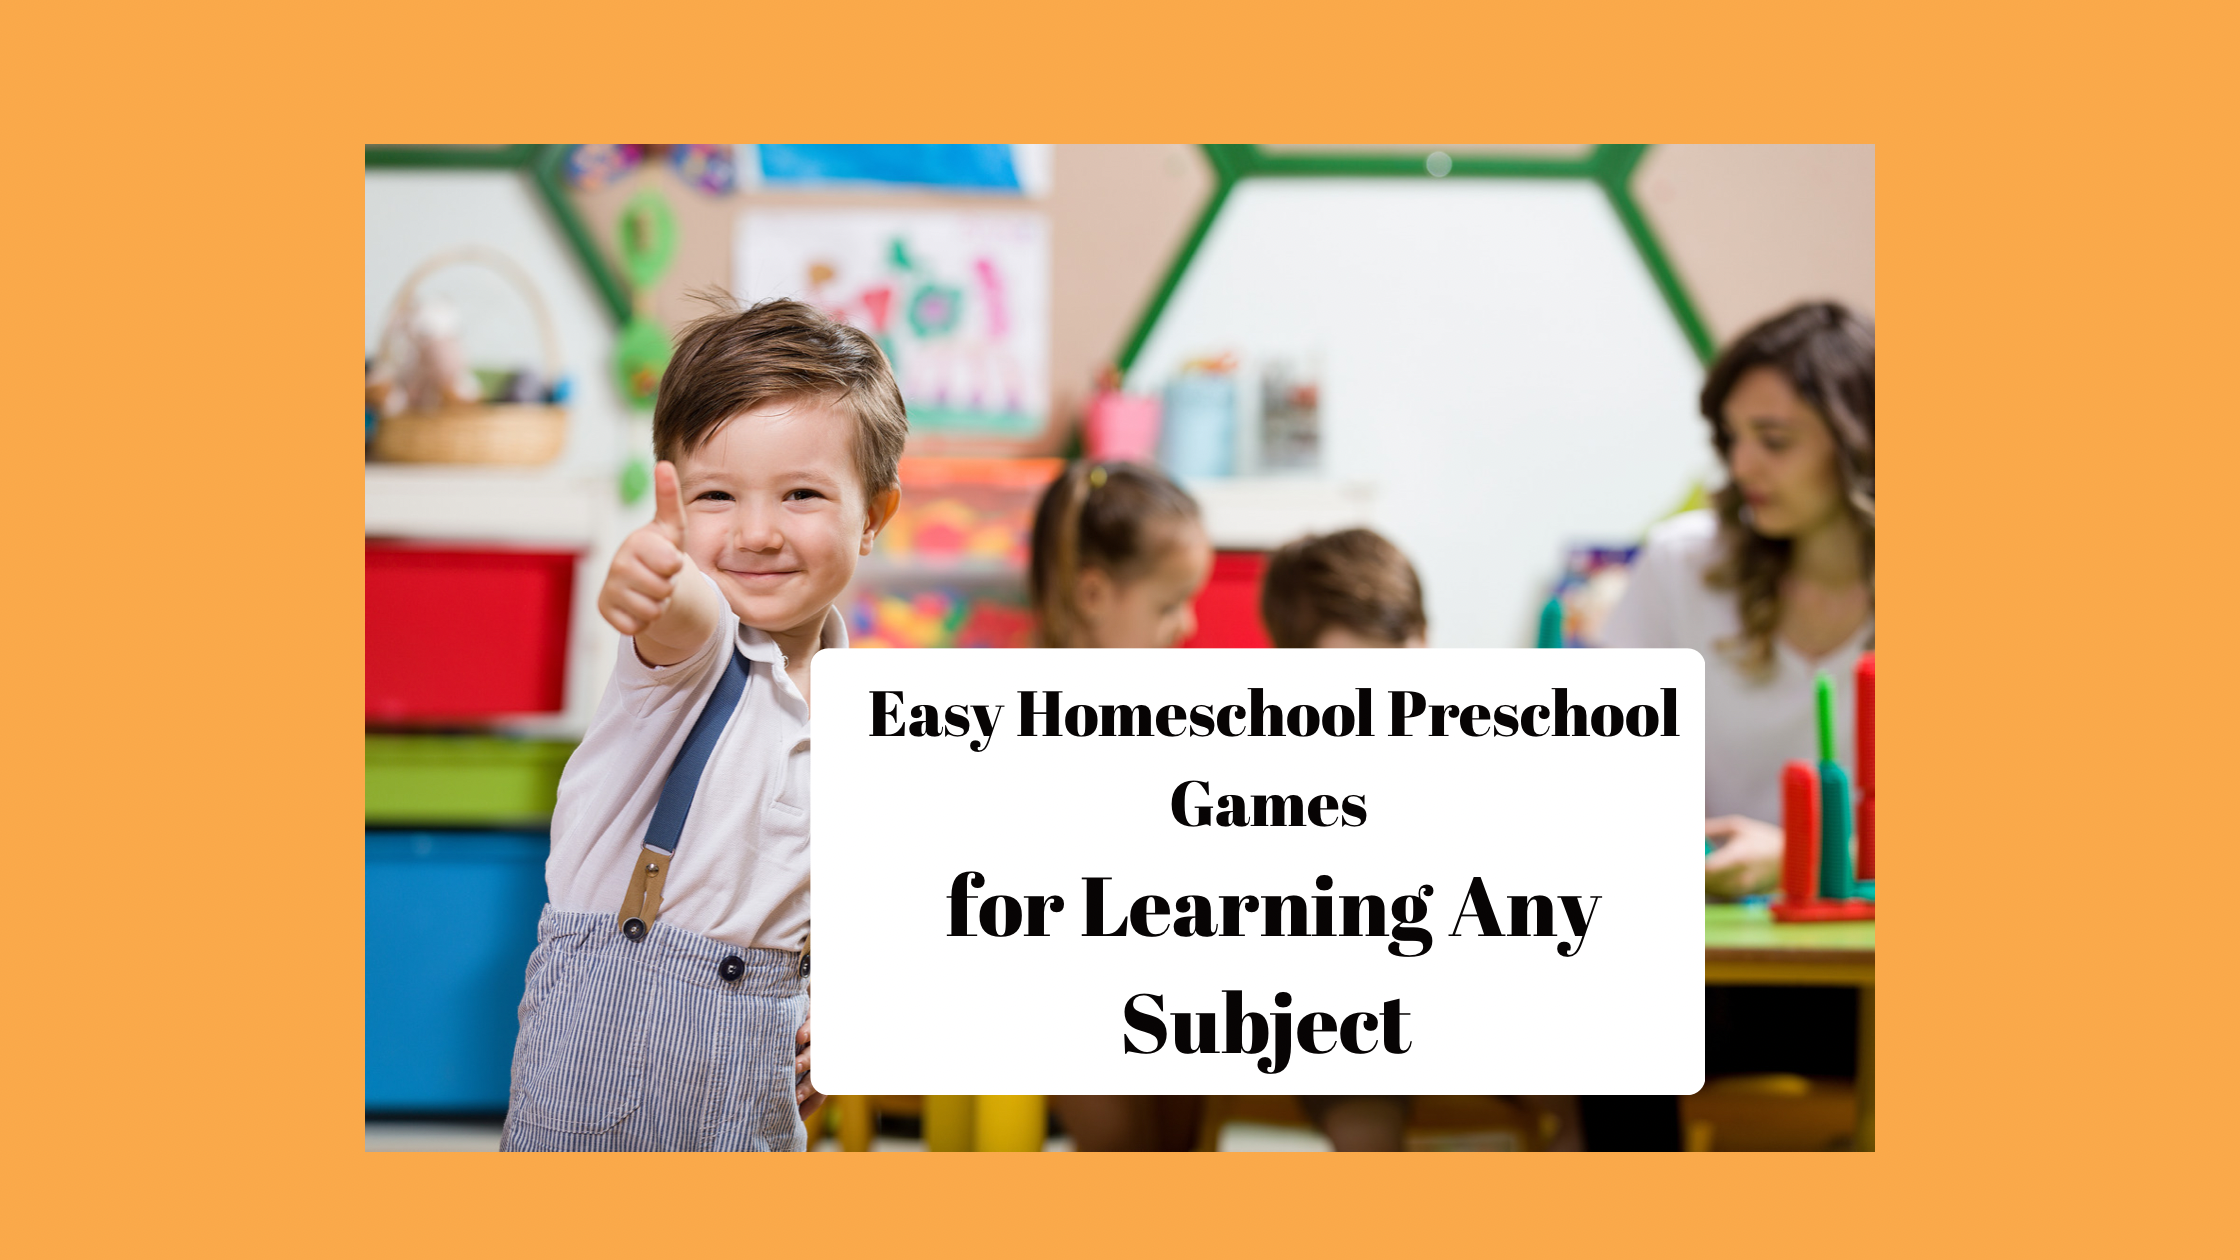 Easy Homeschool Preschool Games for Learning Any Subject